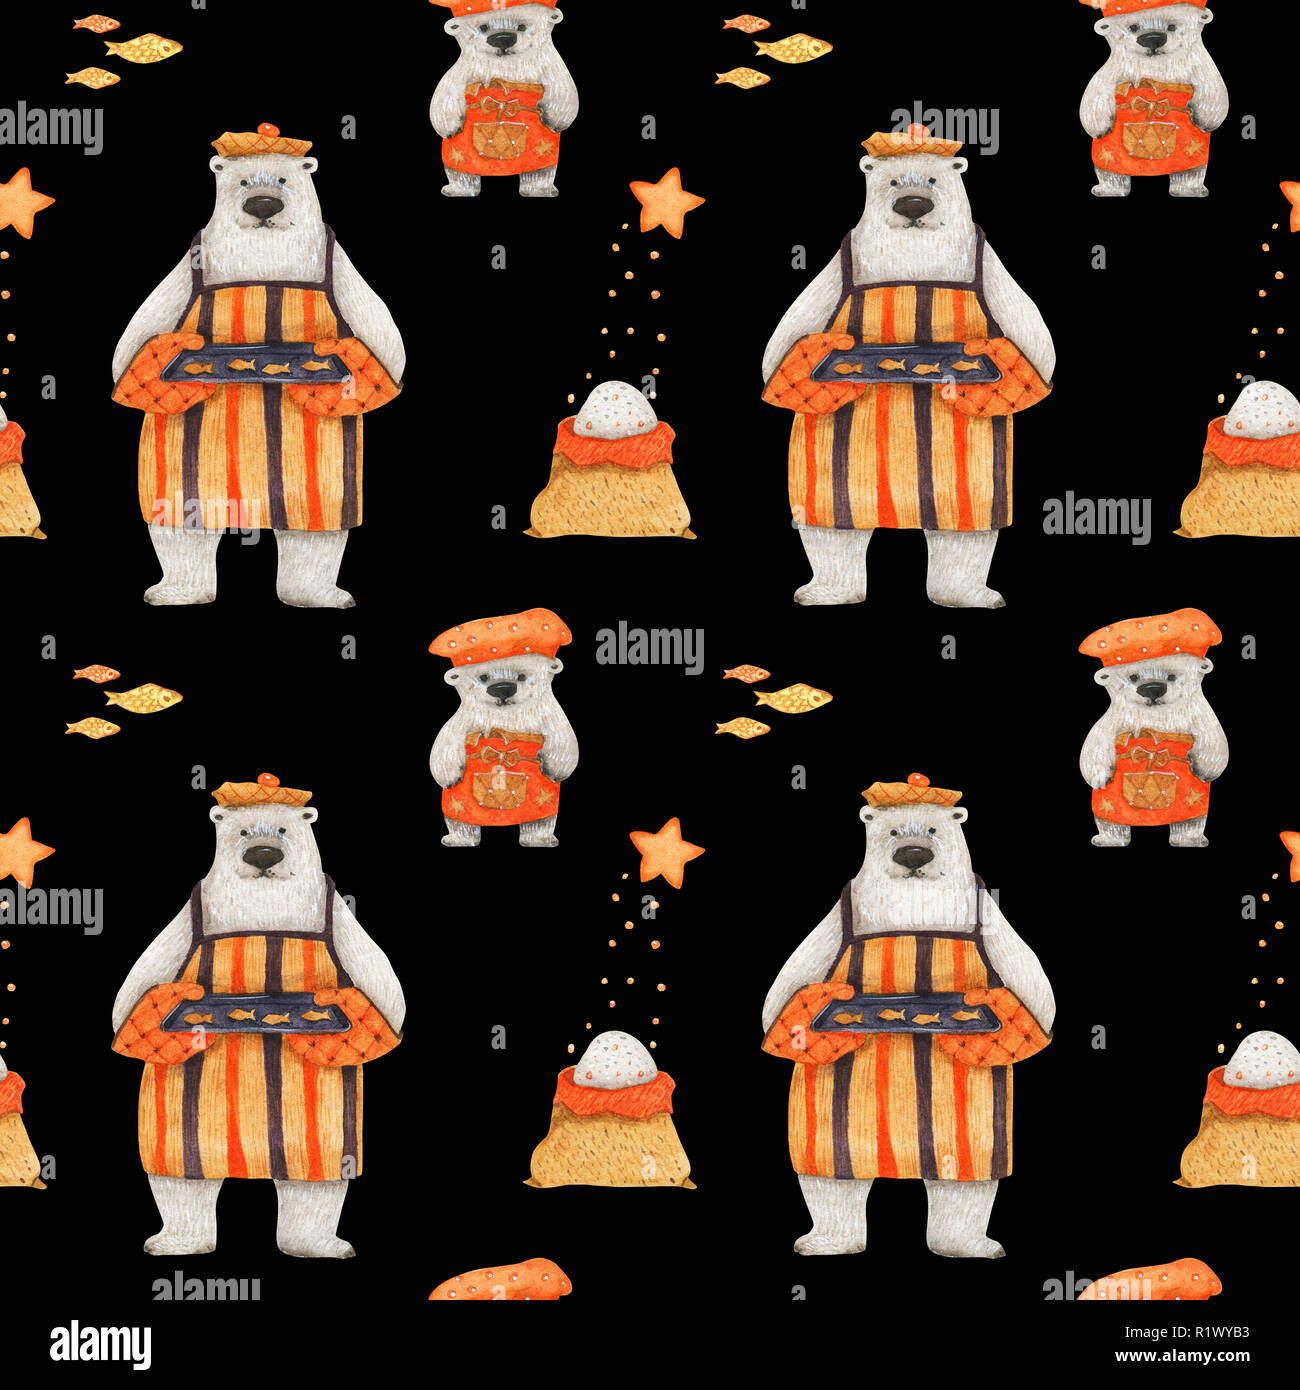 Polar bears baking cookies. Watercolor seamless patterns for textile, wrapping paper and any tiled design. Black background, clipping path uncluded Stock Photo